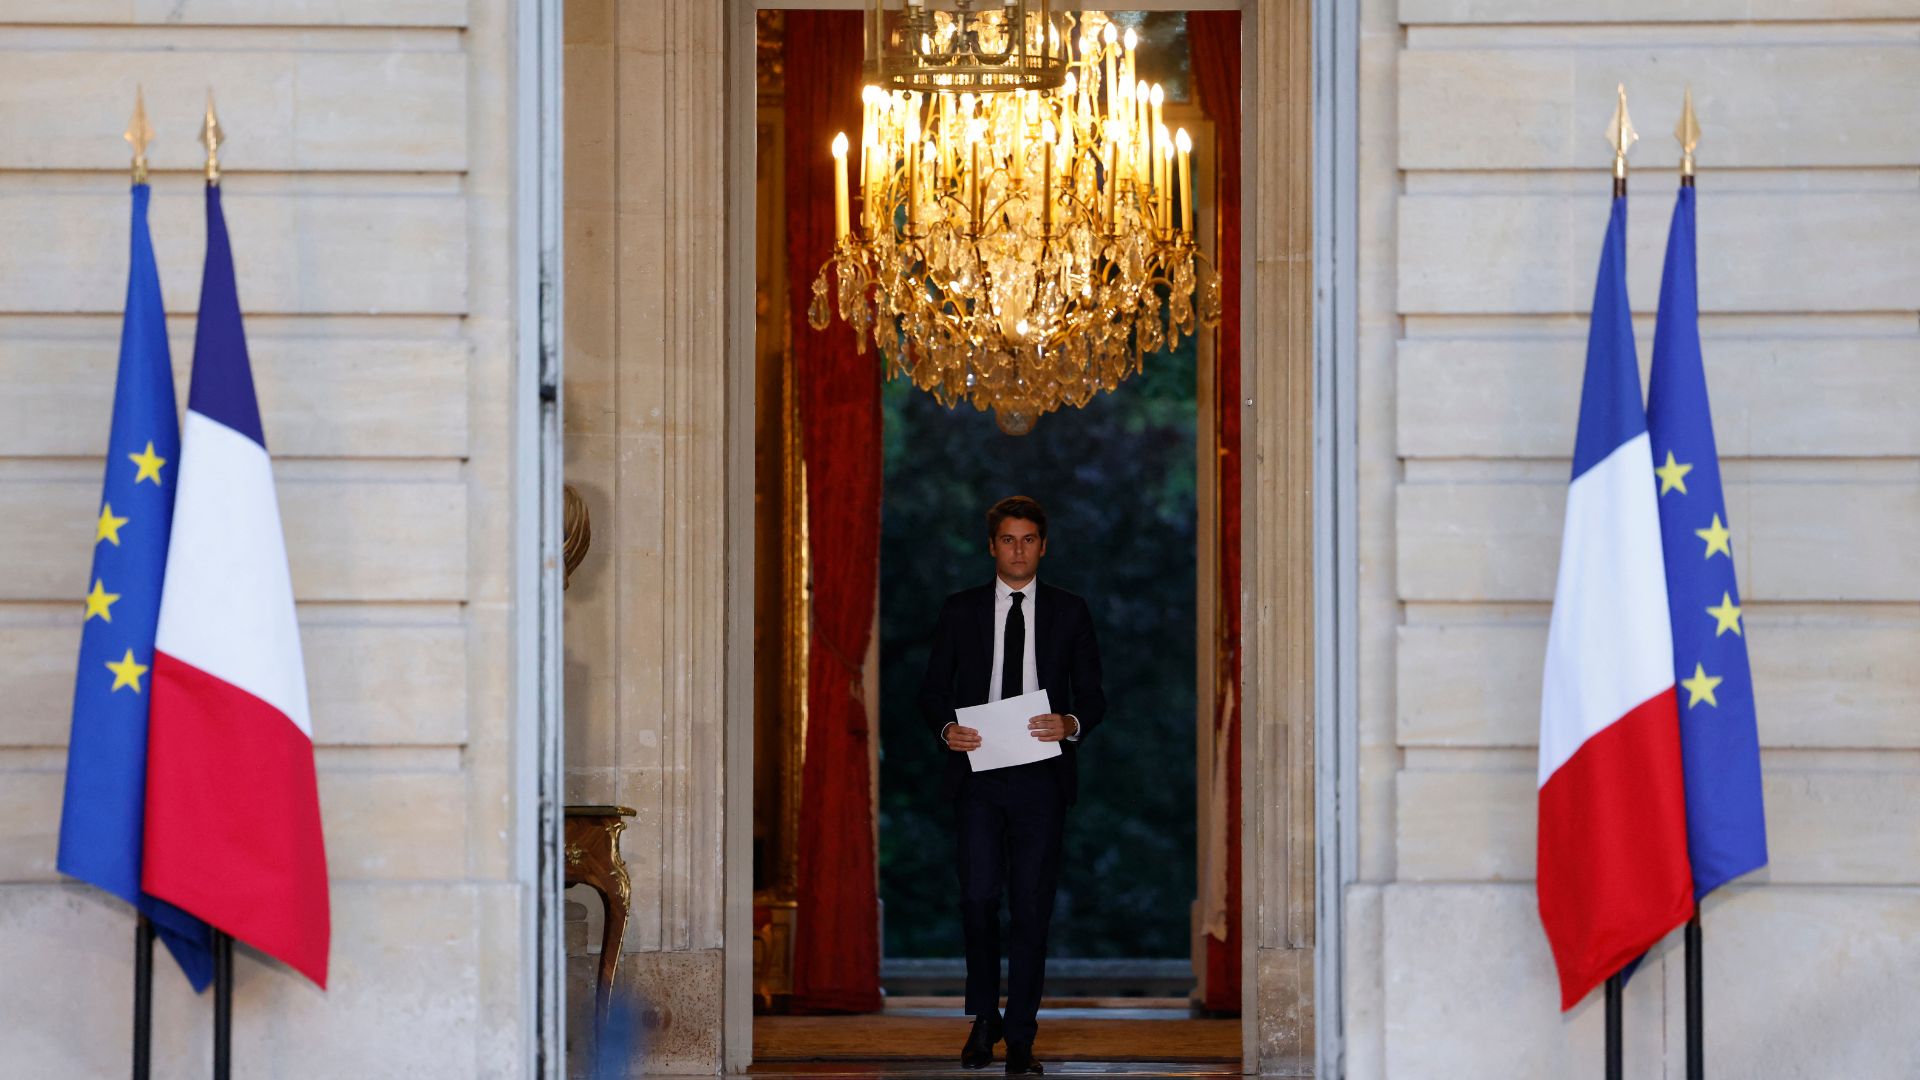 Prime Minister Gabriel Attal tried to resign after election defeat, but was asked to remain while a new government is formed. /Ludovic Marin/AFP